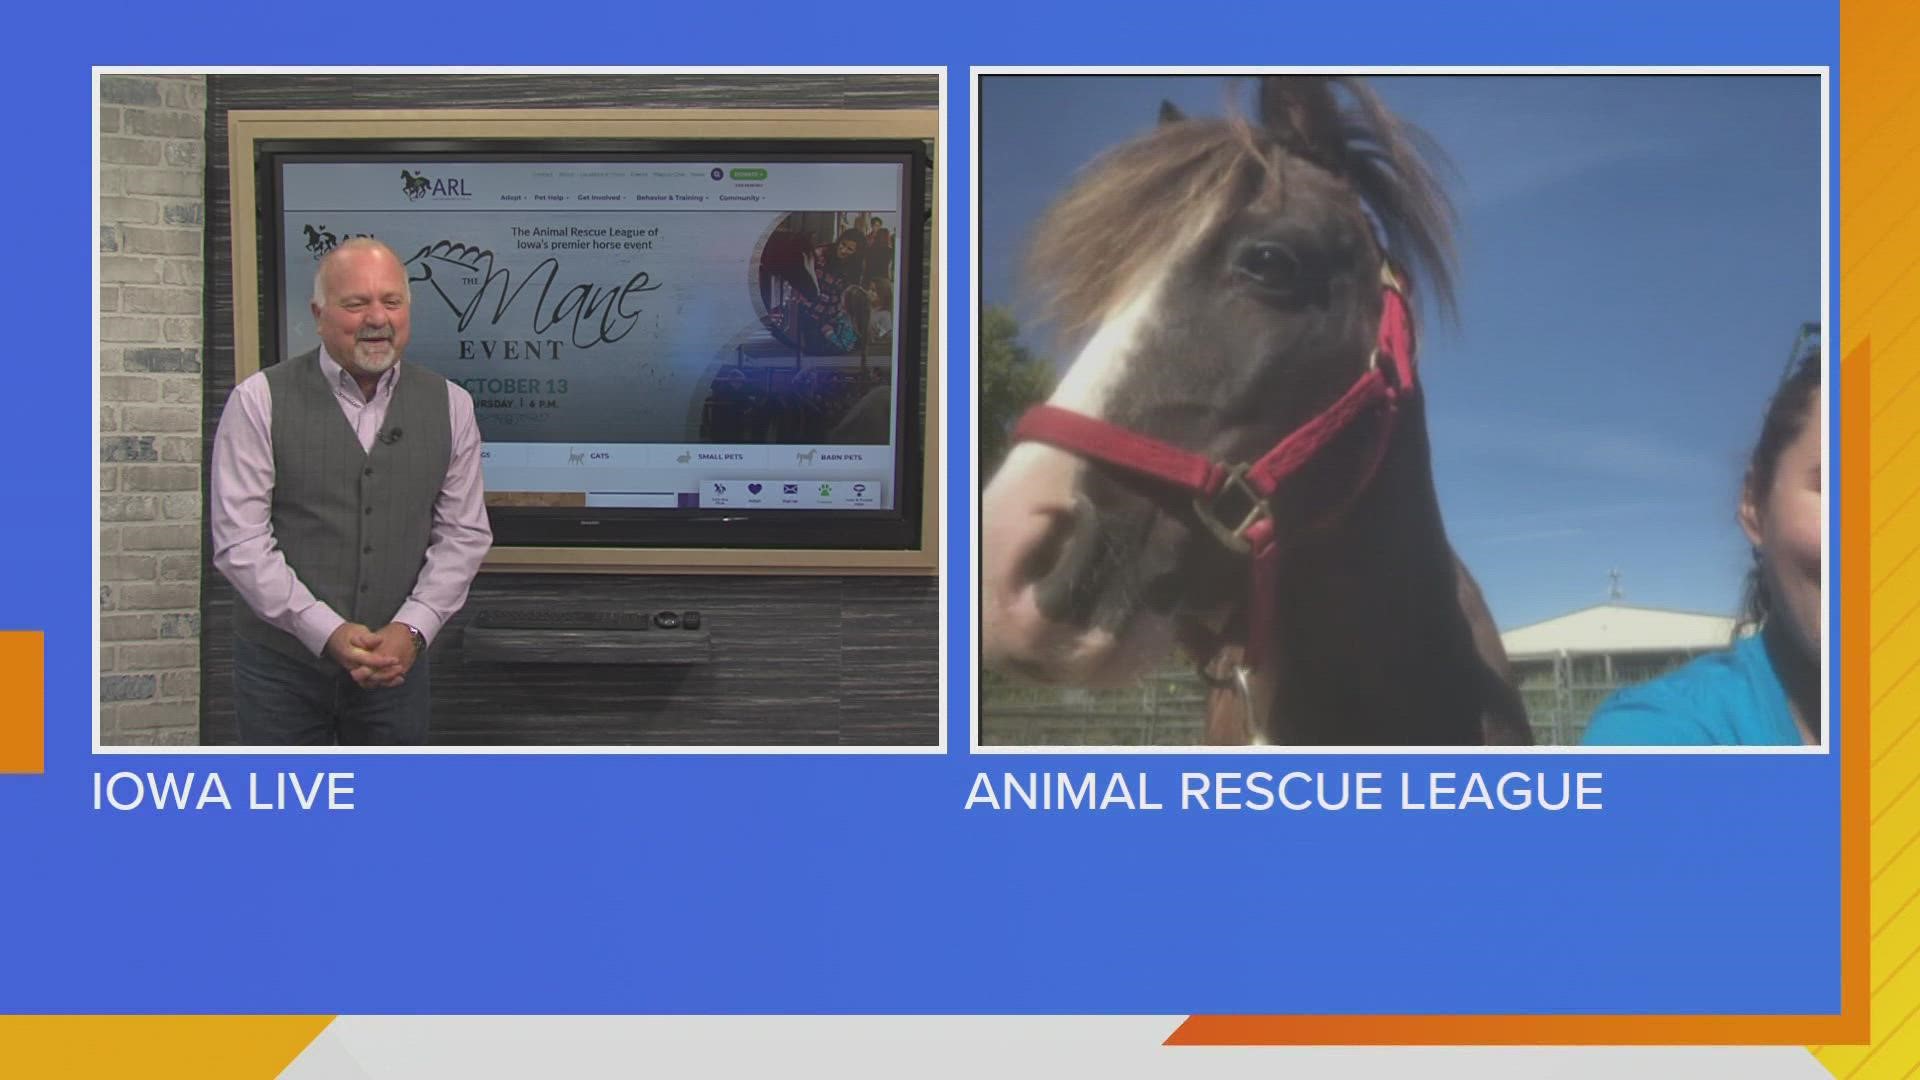 Emily Scholtec, ARL of Iowa, introduces you to TONY THE PONY, teaches about the Camp Purr Program to acquire barn cats & the Mane Event October 13th.